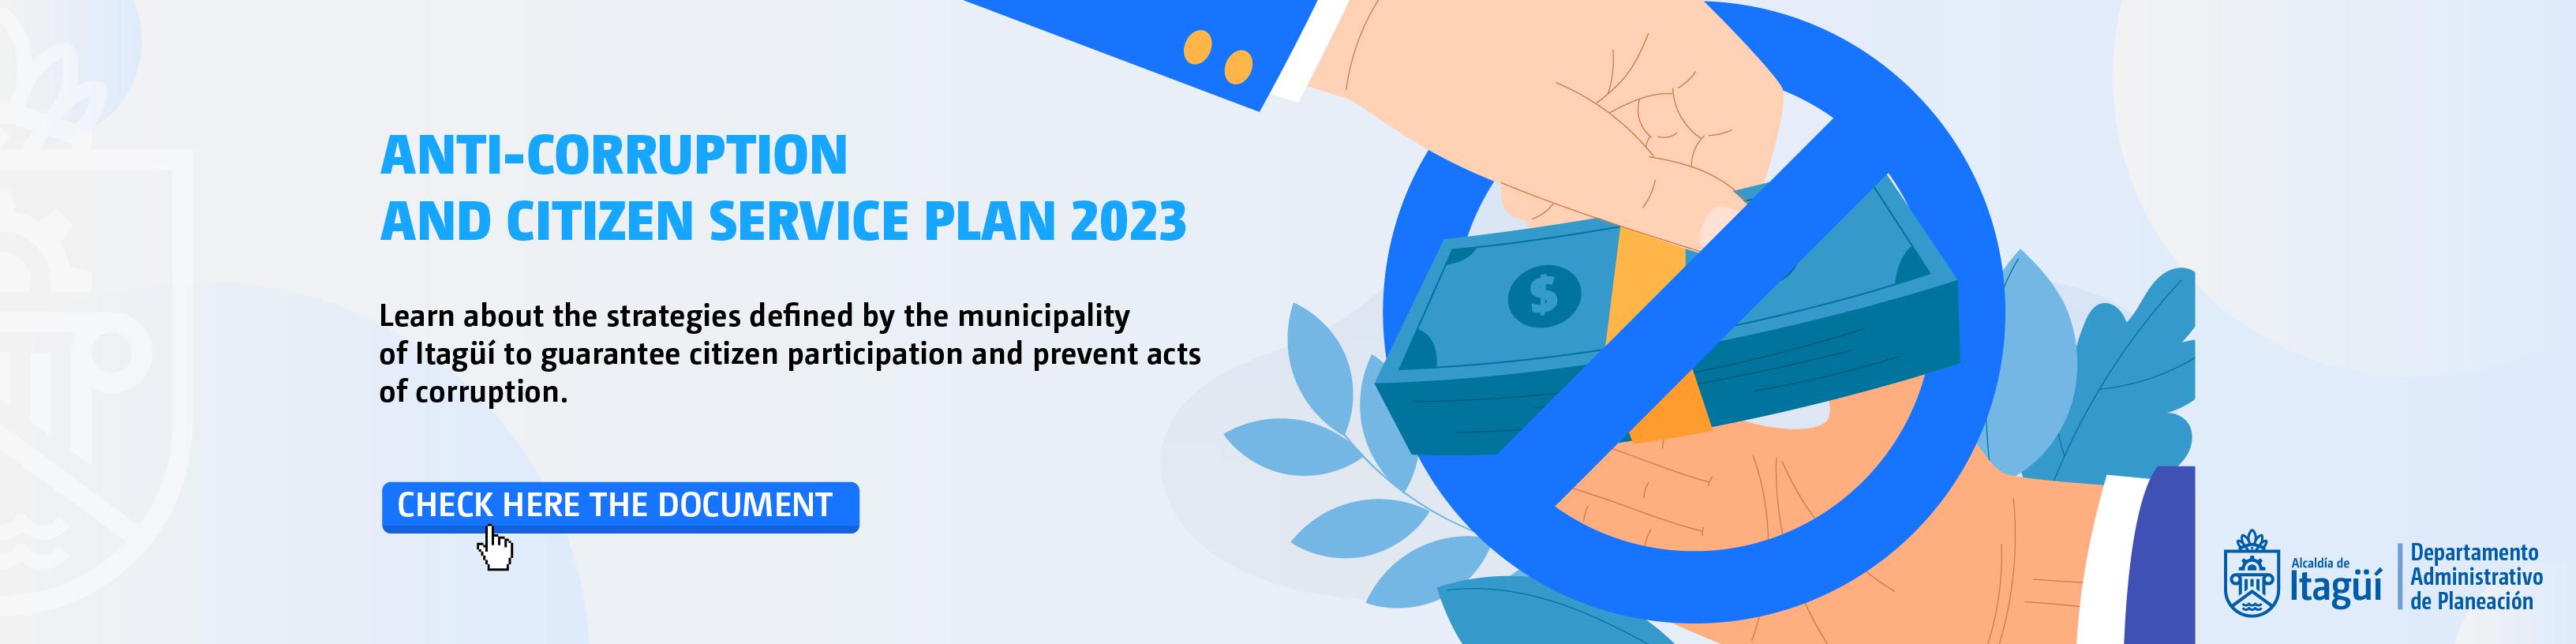 Here is the document on the 2023 anti-corruption and citizen service plan of the municipality of Itagüí